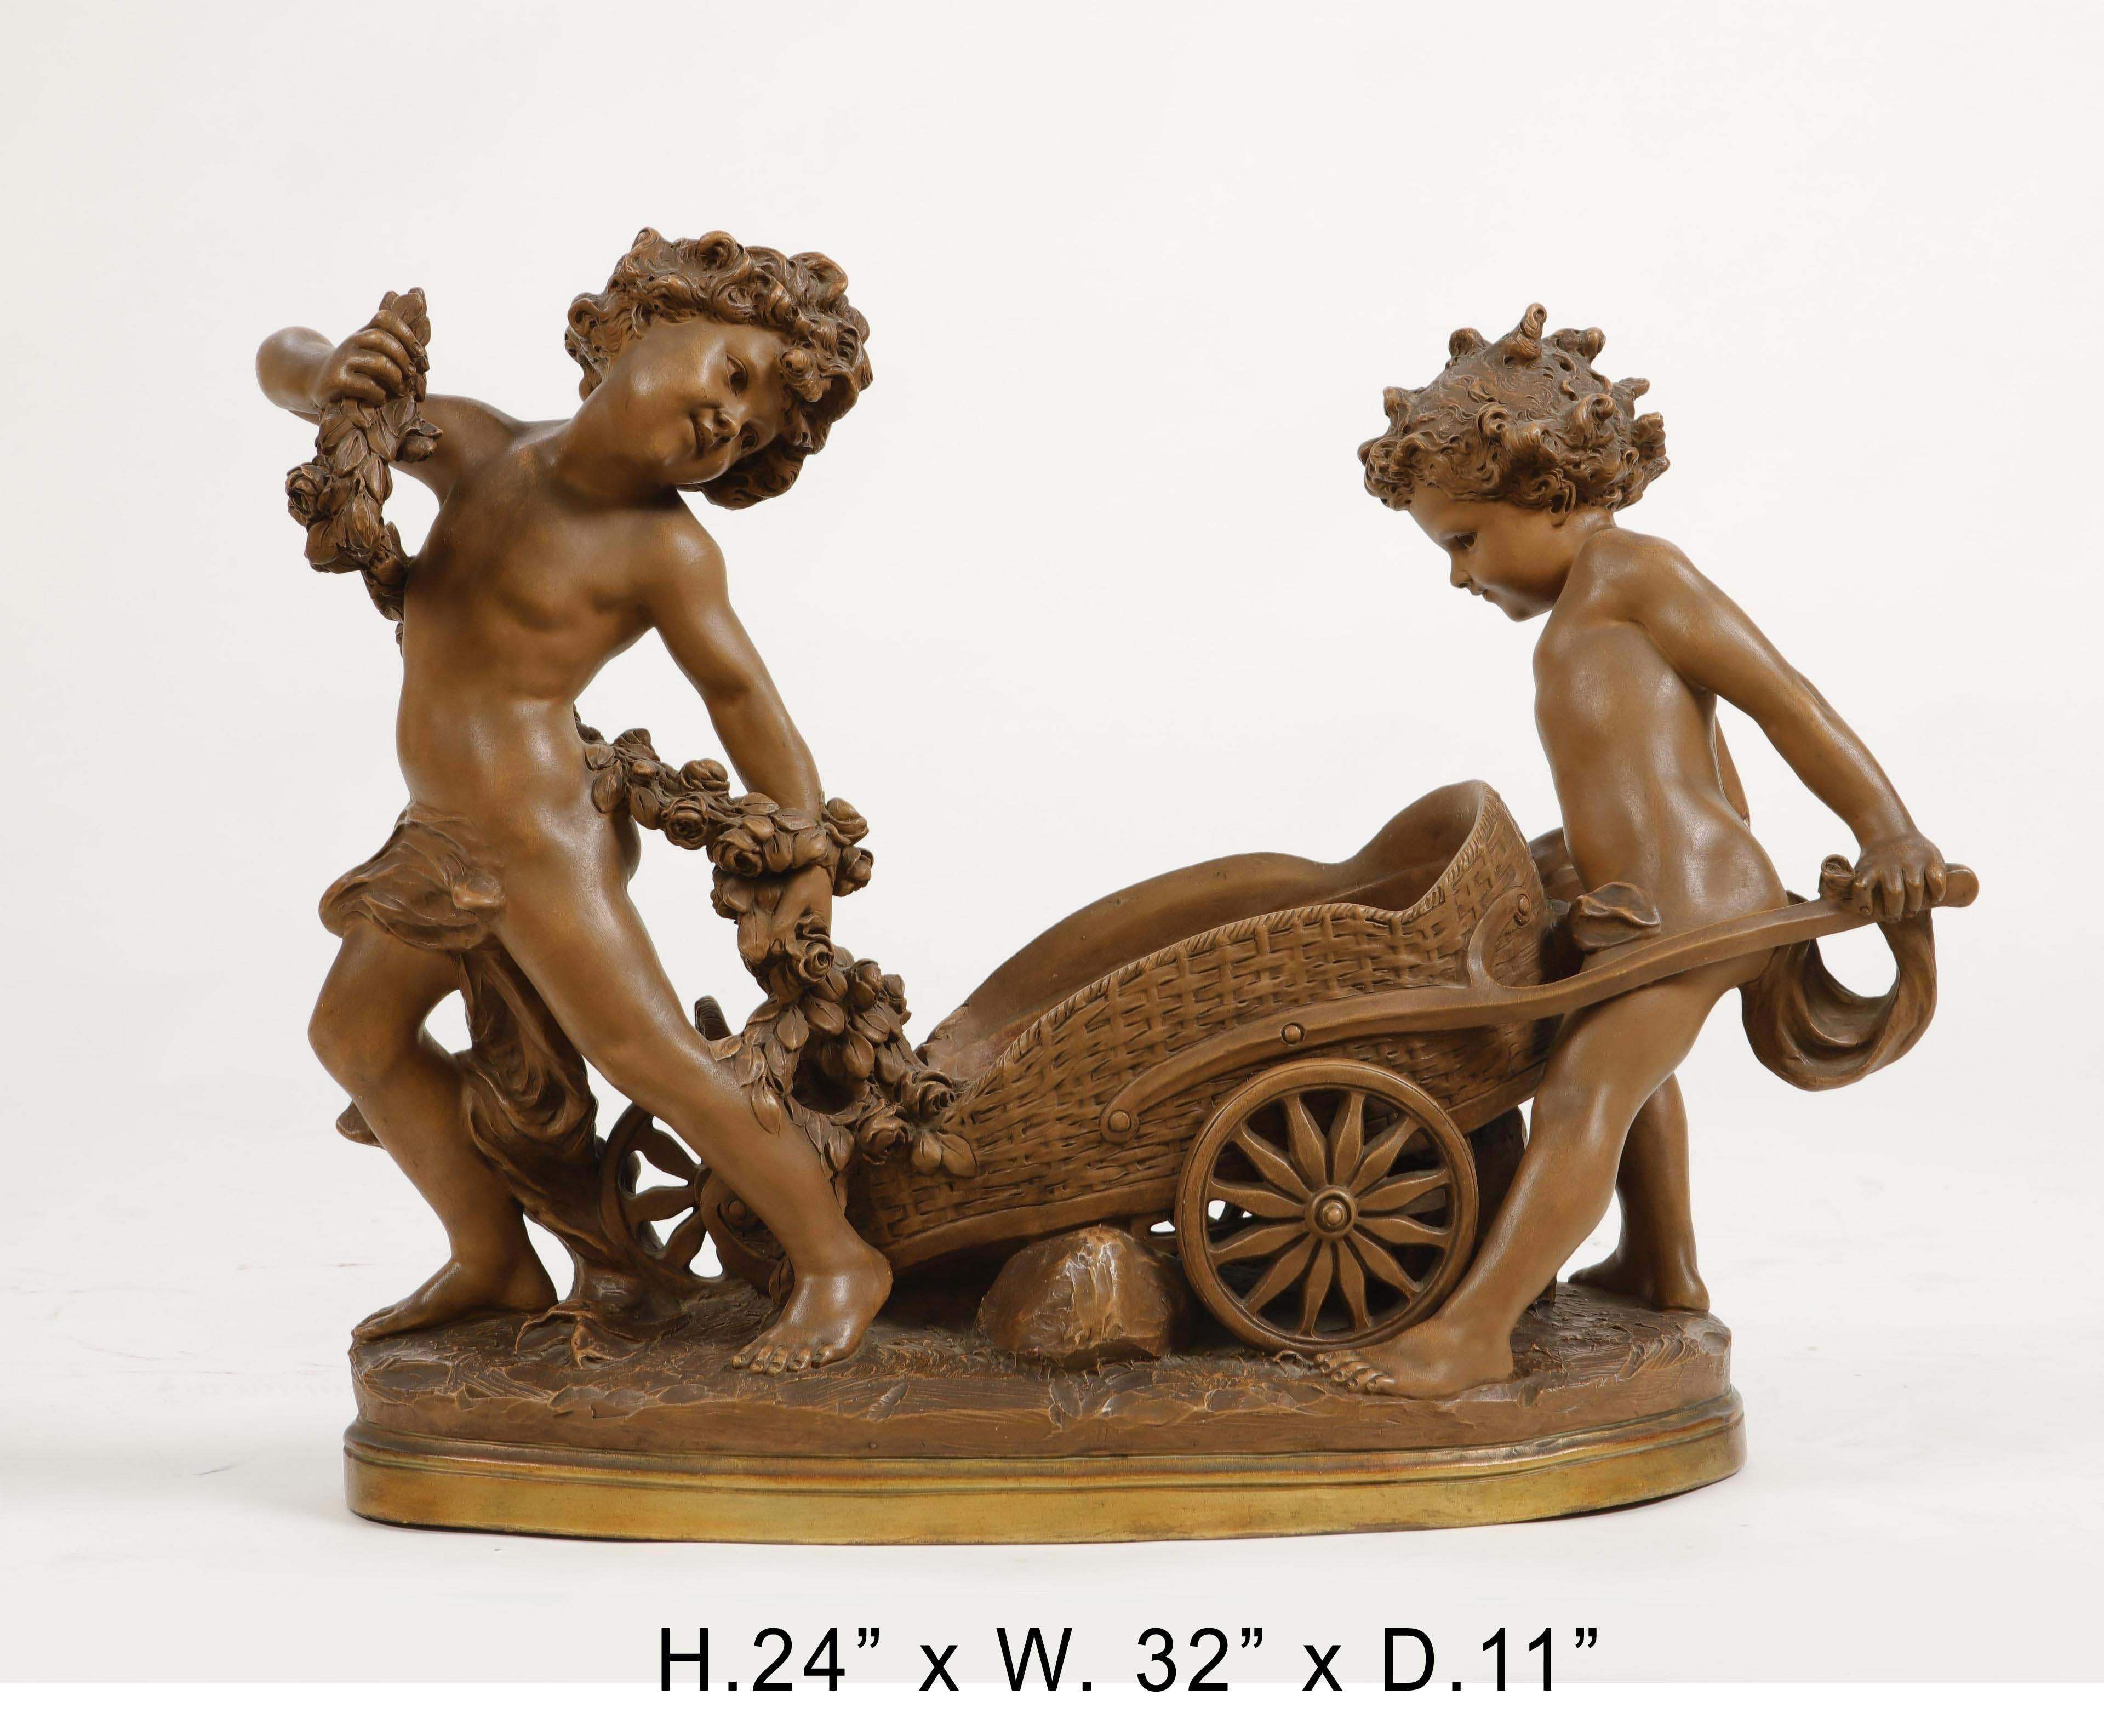 Stunning Italian terracotta cherub figure group centerpiece depicting one cherub holding a swagged garland, another cherub pushing a wheelbarrow, on naturalistic ground-from base,
20th century.
Signed Luca Madrassi.
(Born 1848- Died 1919)
Luca